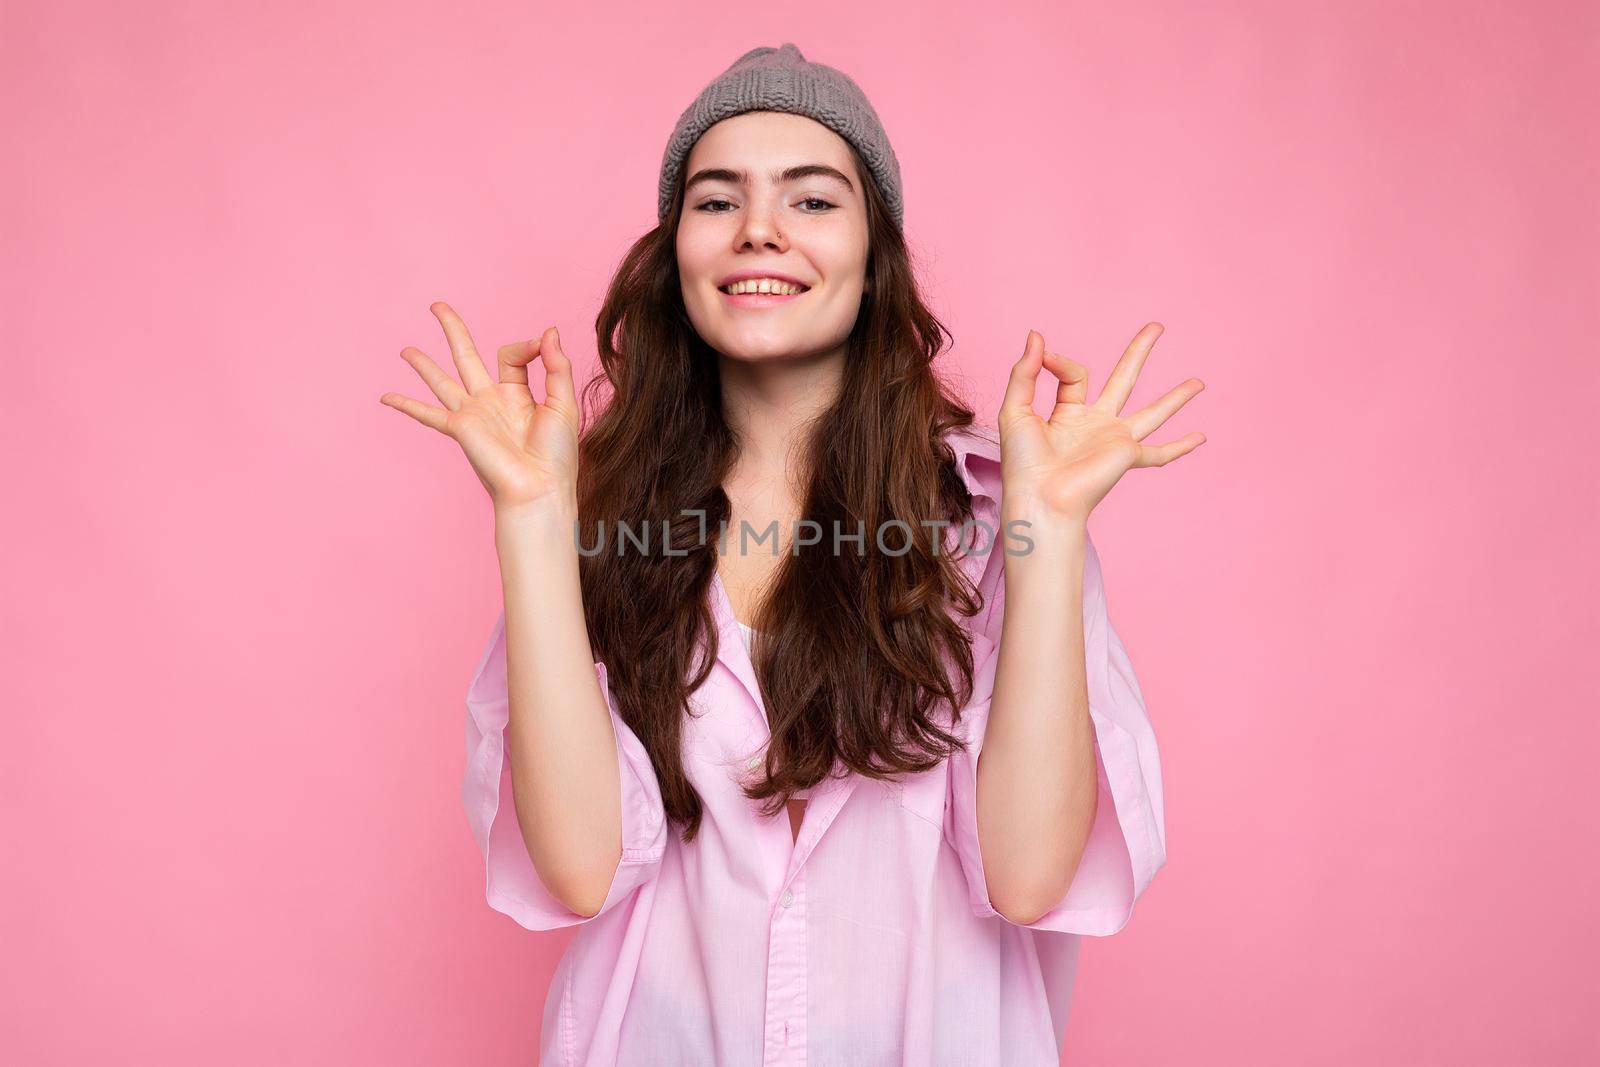 Portrait of beautiful positive cheerful cute smiling young brunette woman in stylish shirt and hipster grey hat isolated on pink background with copy space and showing okay gesture.